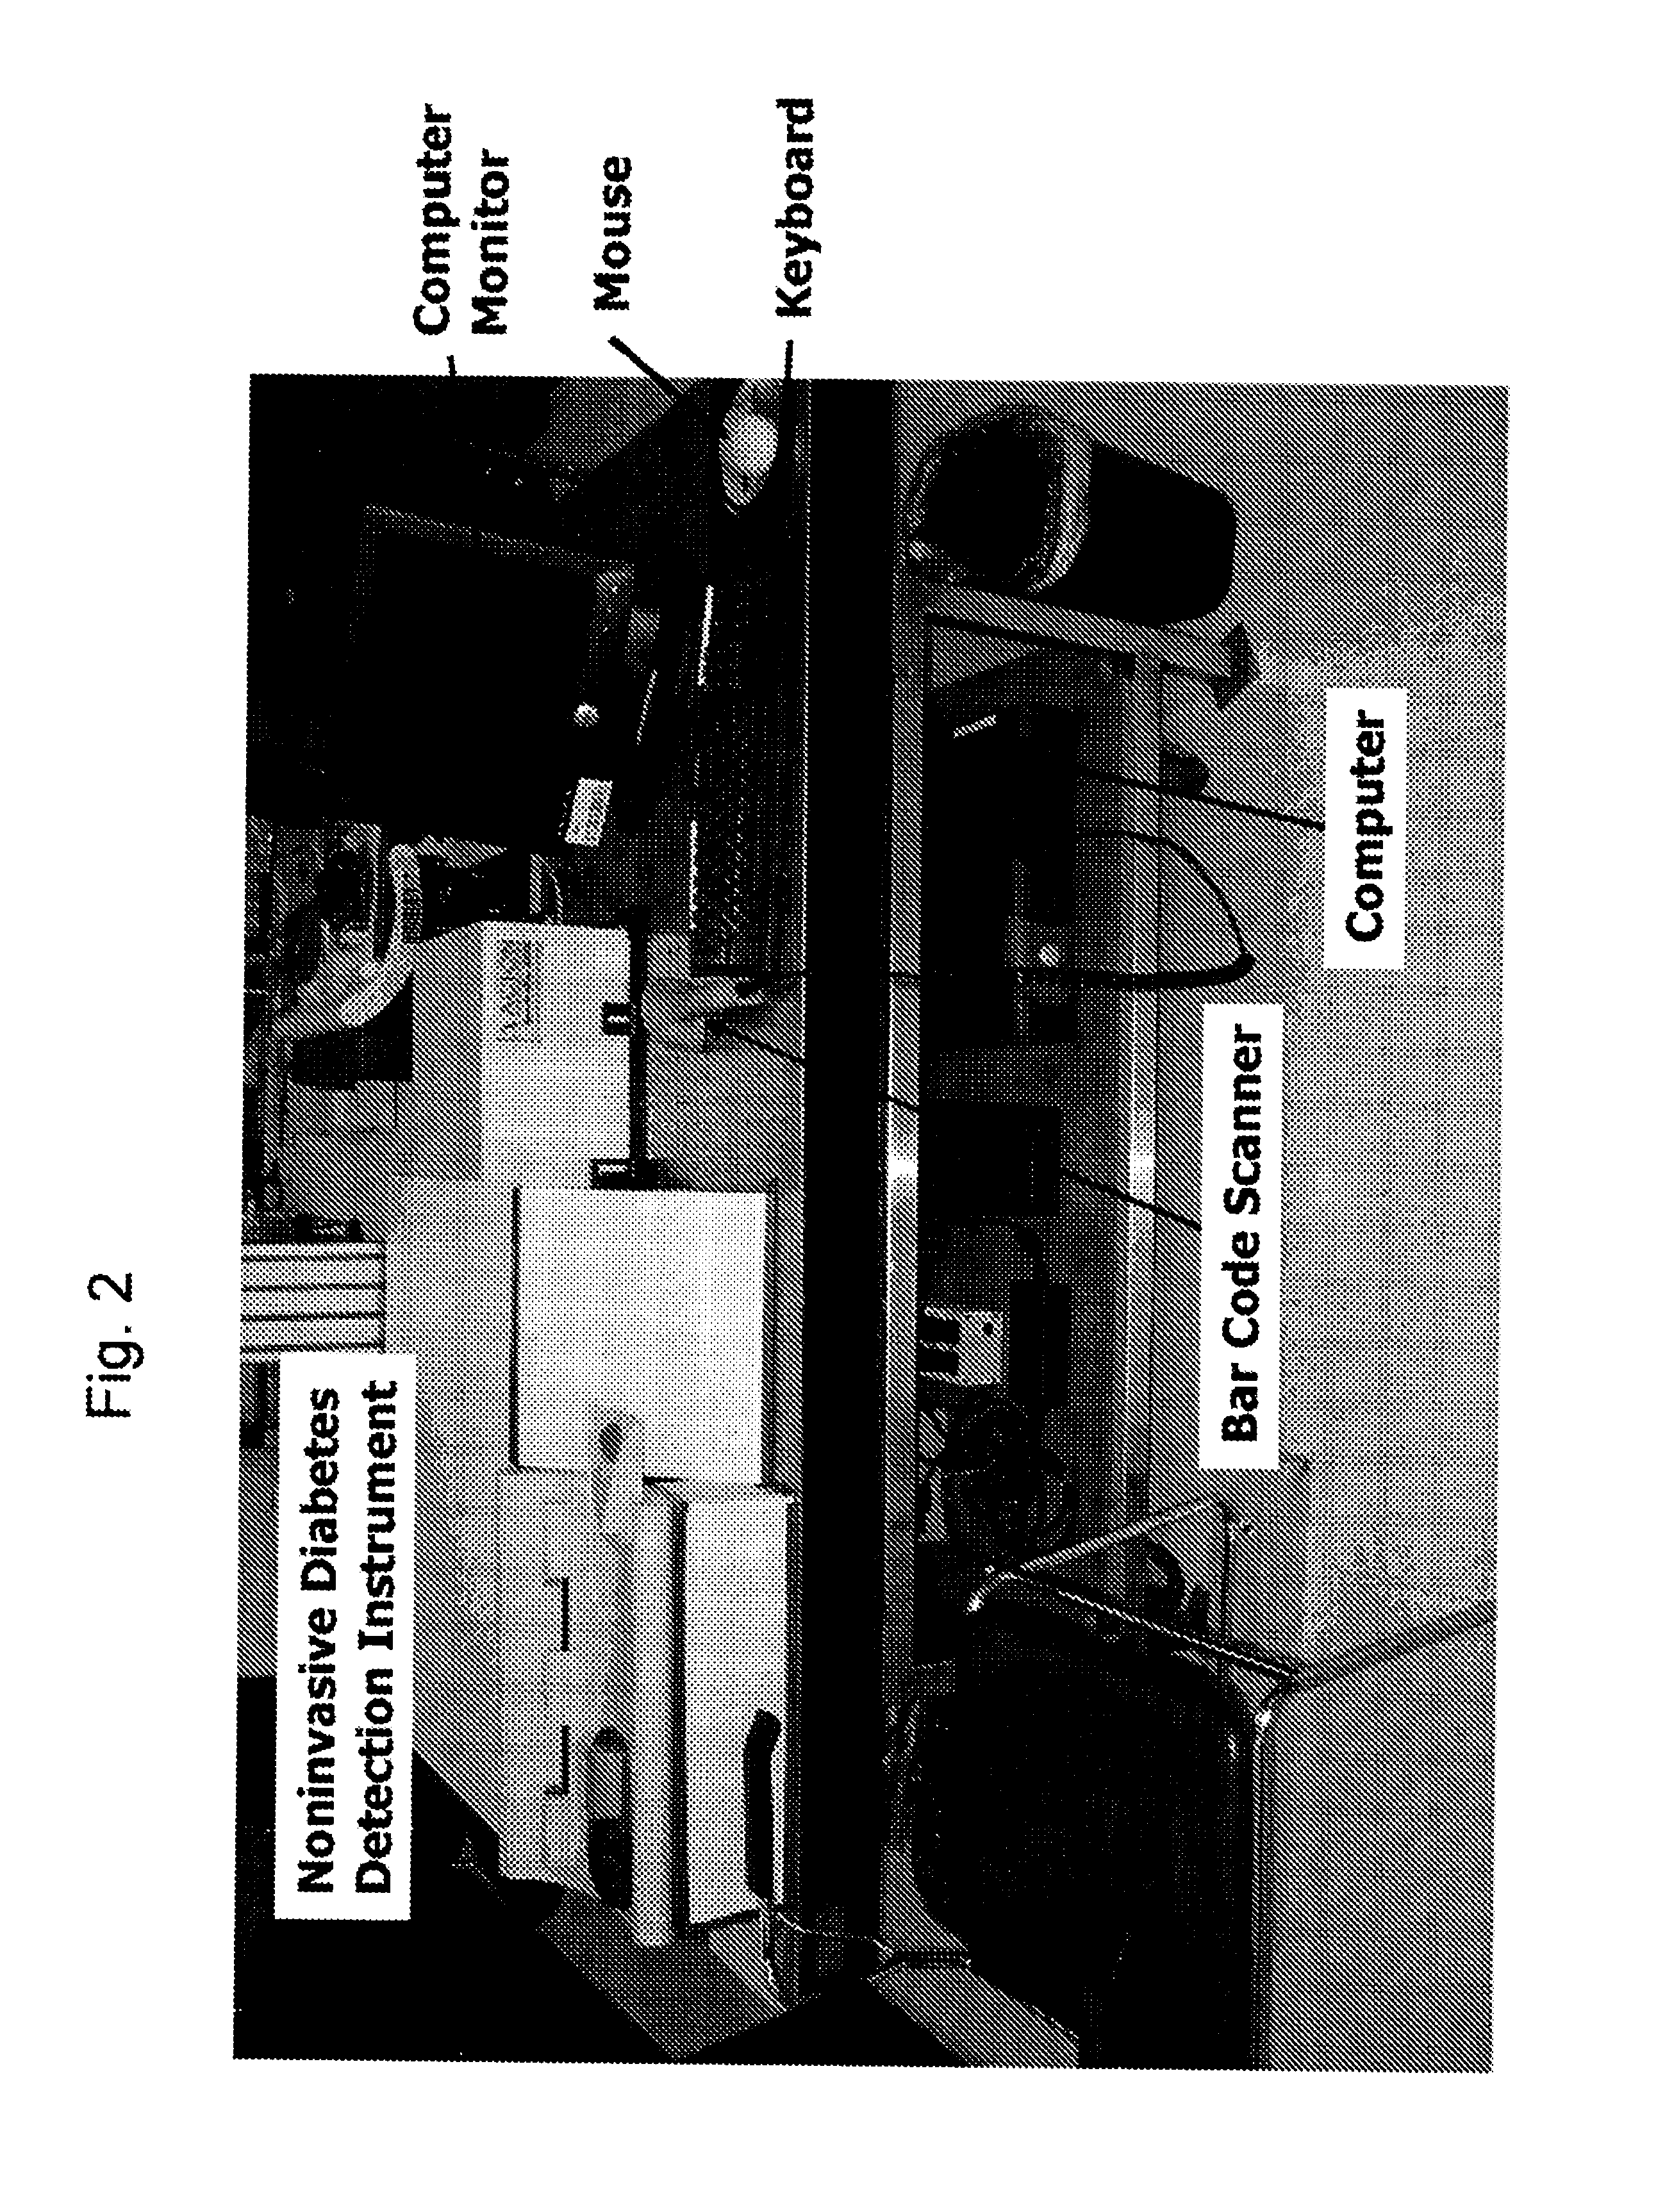 Method and Apparatus to Compensate for Melanin and Hemoglobin Variation in Determination of a Measure of a Glycation End-Product or Disease State Using Tissue Fluorescence